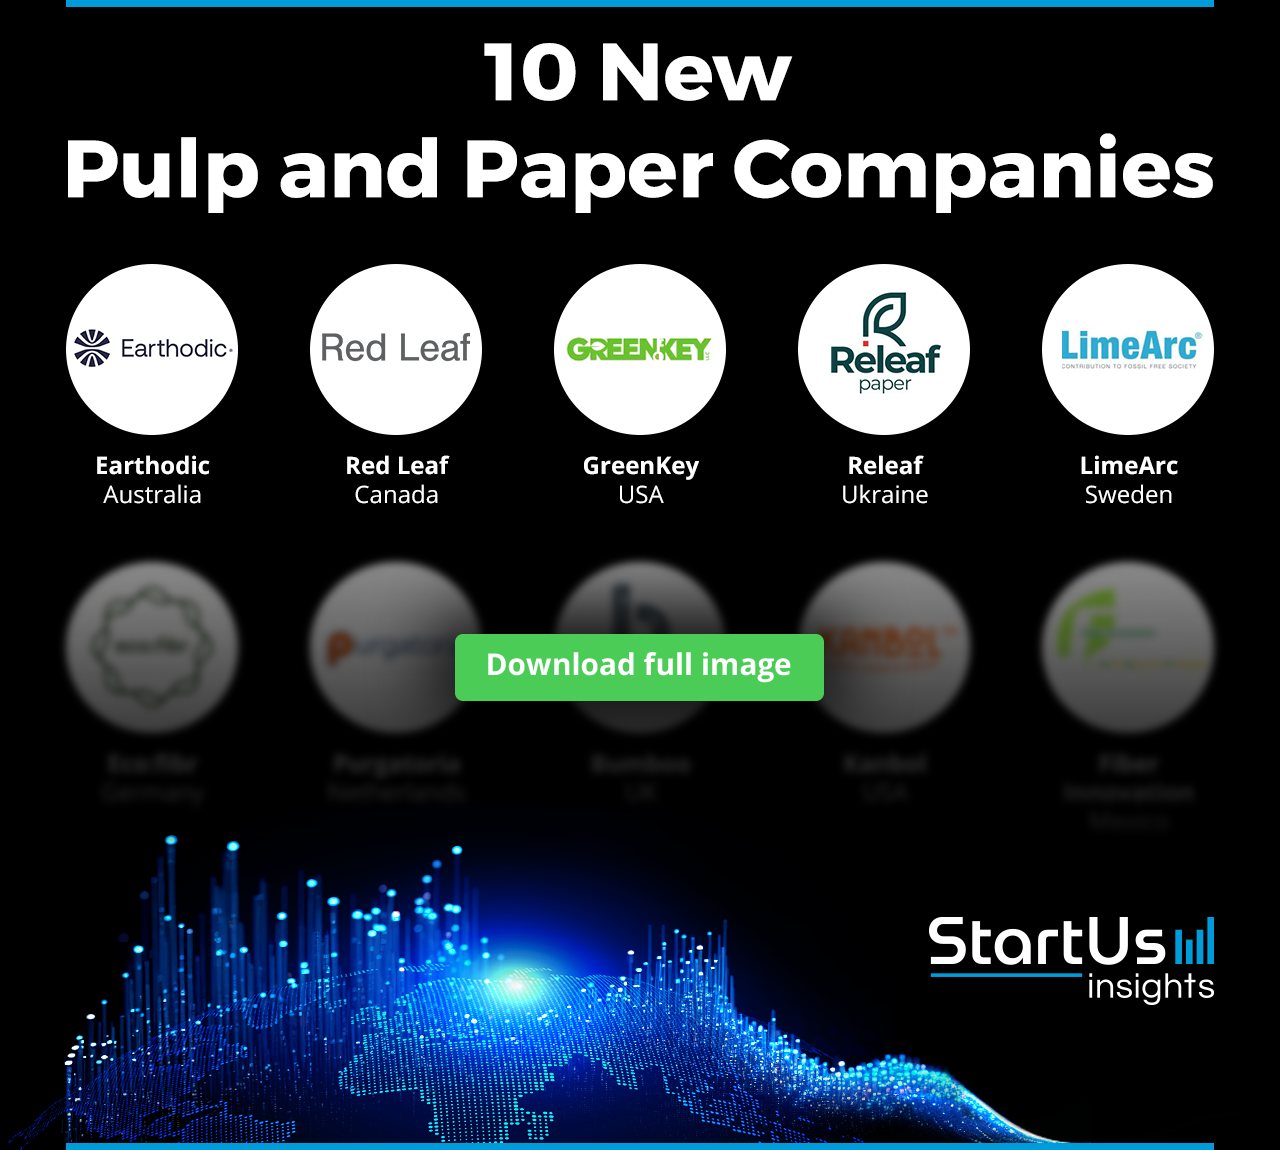 New-Pulp&Paper-Companies-Logos-Blurred-StartUs-Insights-noresize